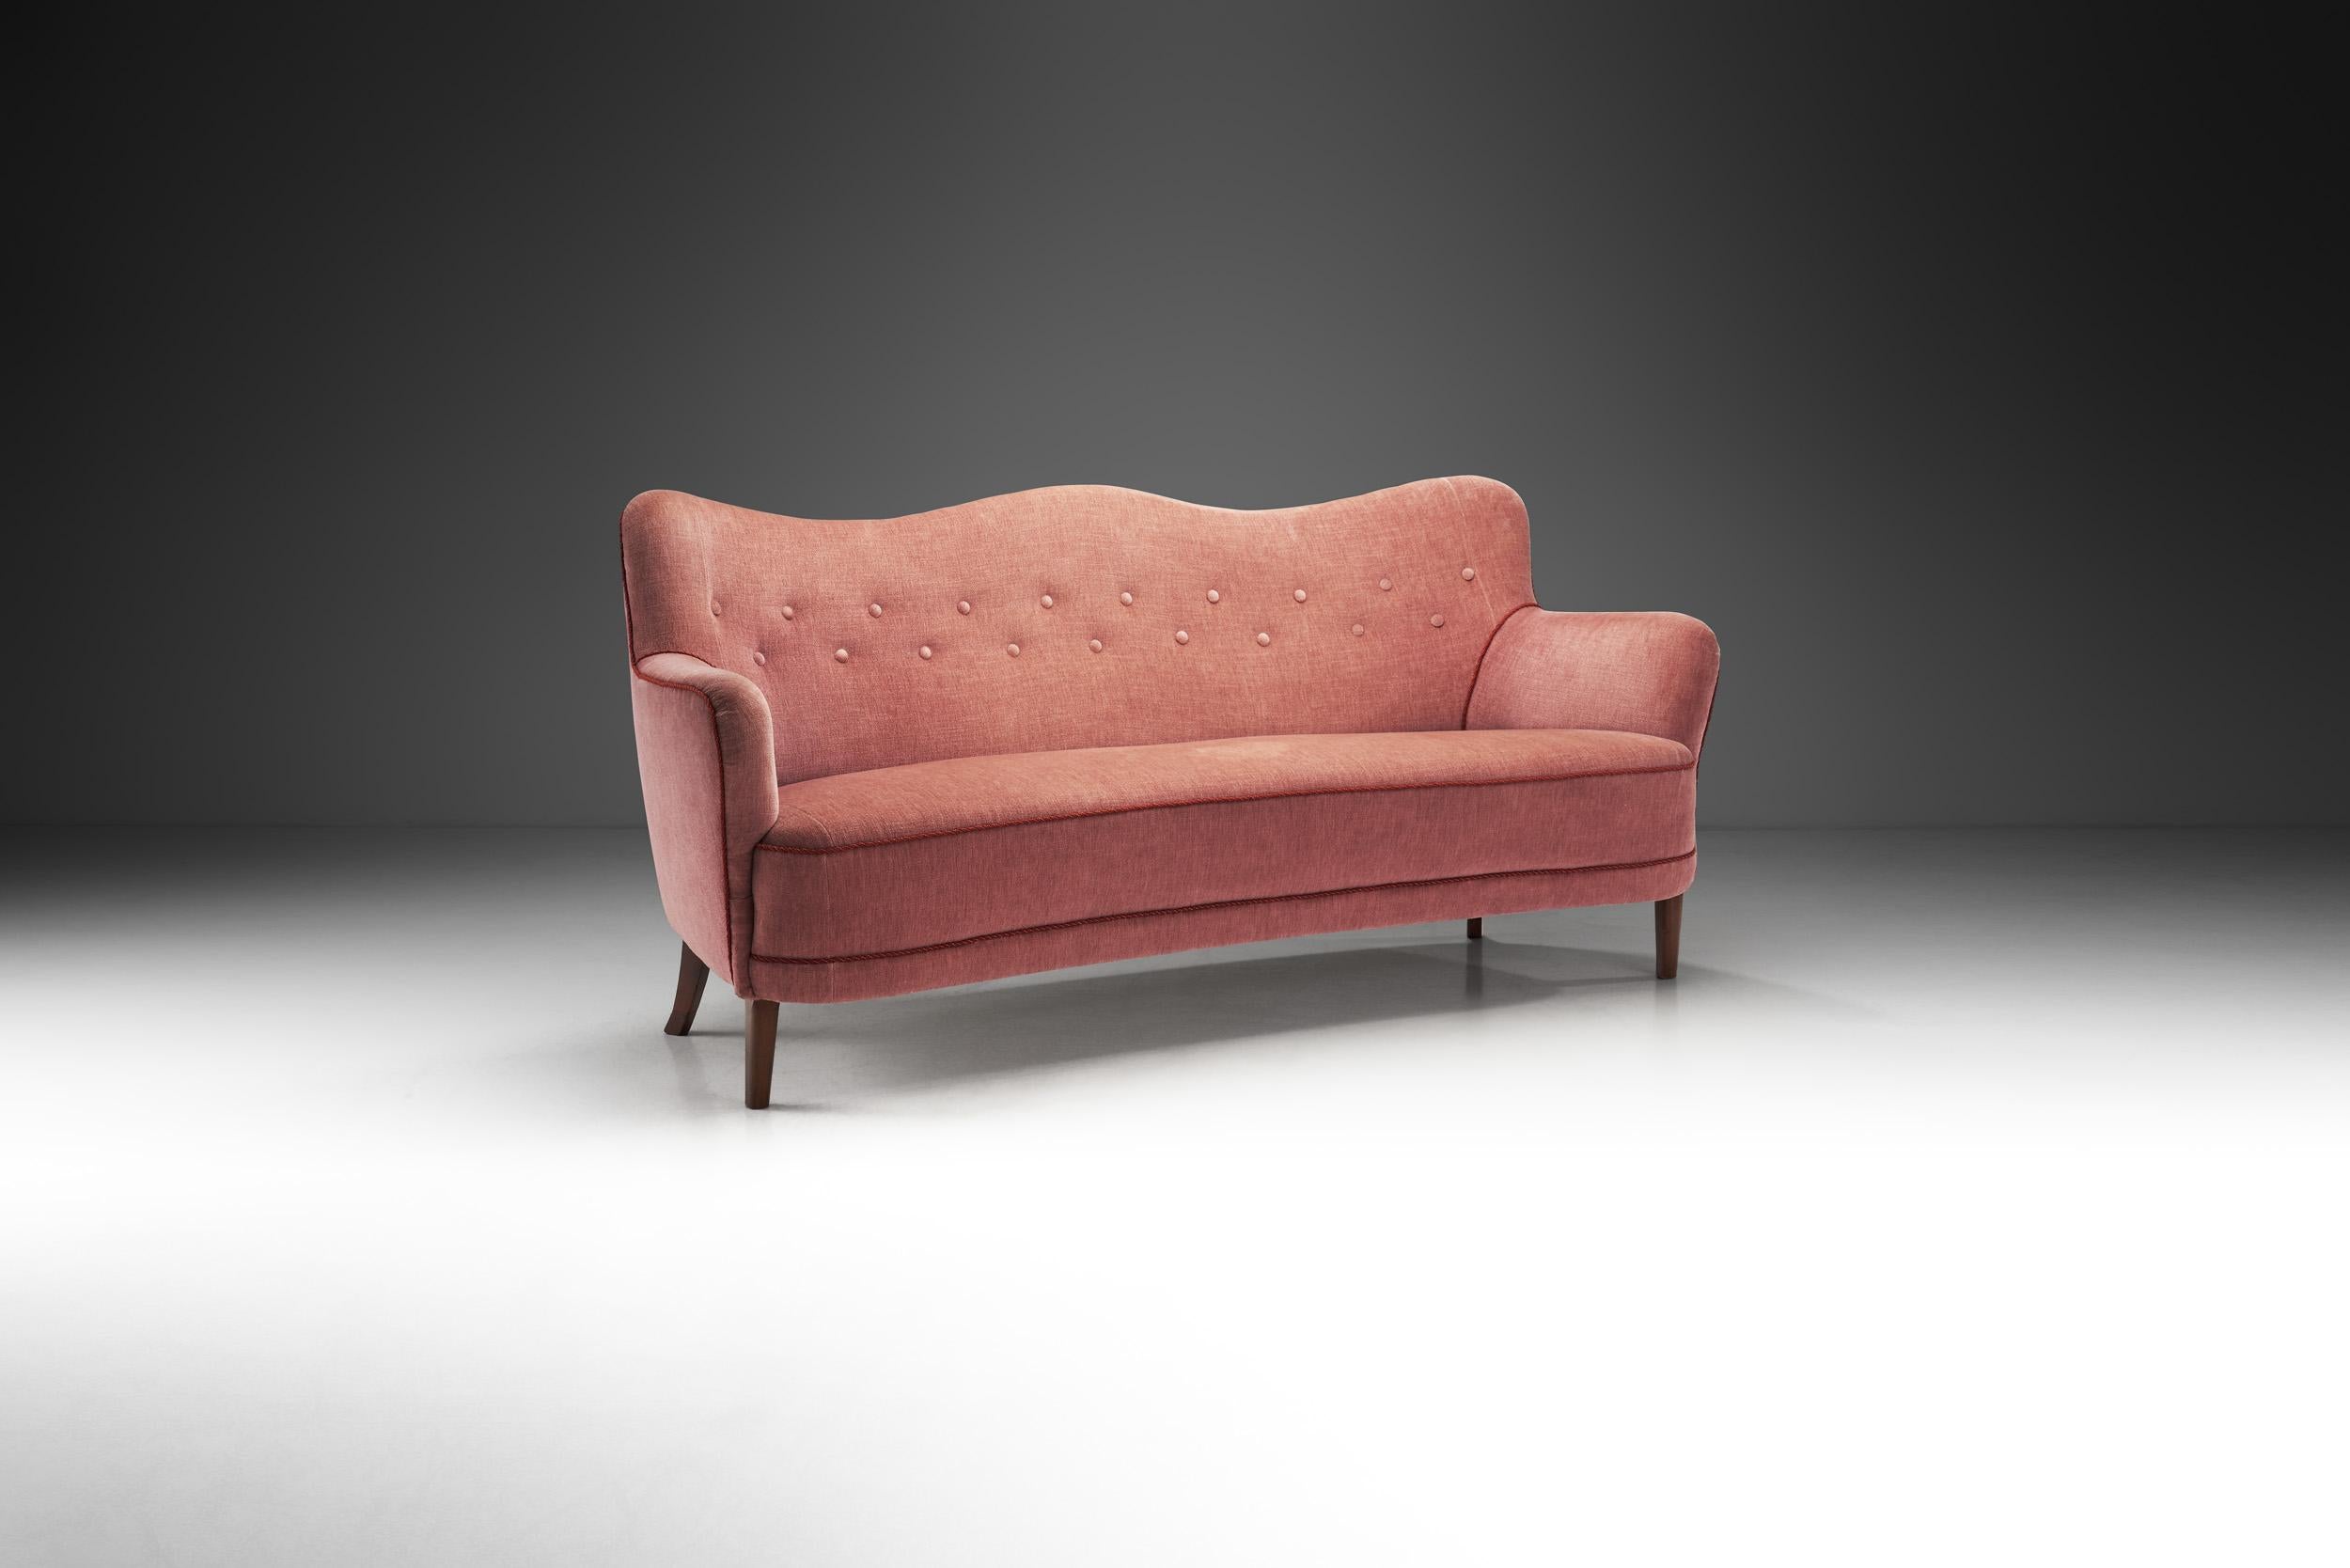 “Danish Modern” is a recognized term around the world standing for the characteristic style of Danish design created during the 20th century. As this elegant three-seater sofa shows, the style is characterized by clarity in design and extremely high